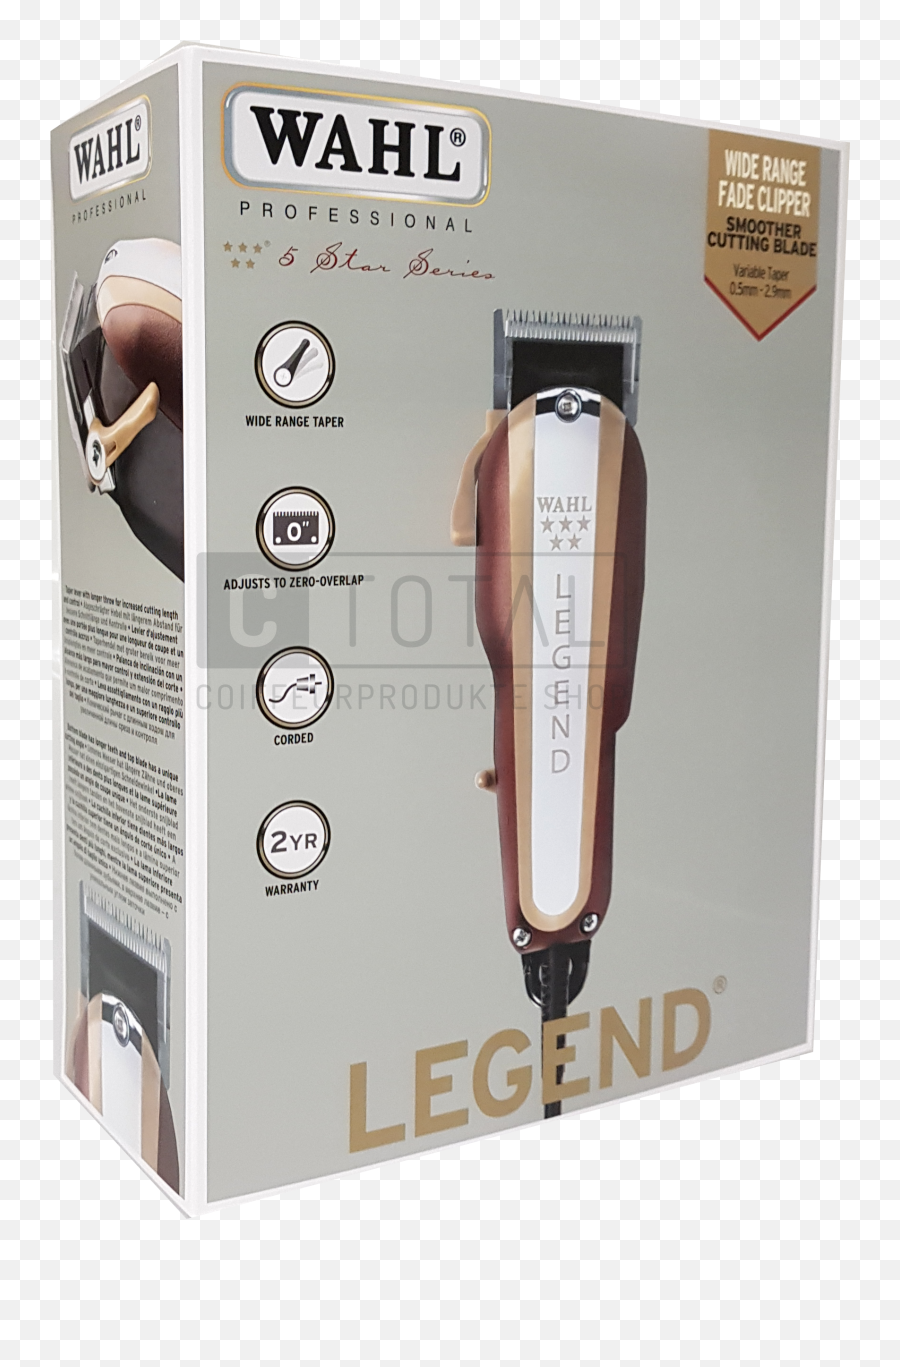 Wahl 5 Star Legend Hair Clippers - Wahl Legend 5 Star Png,Wahl Icon 5 Star